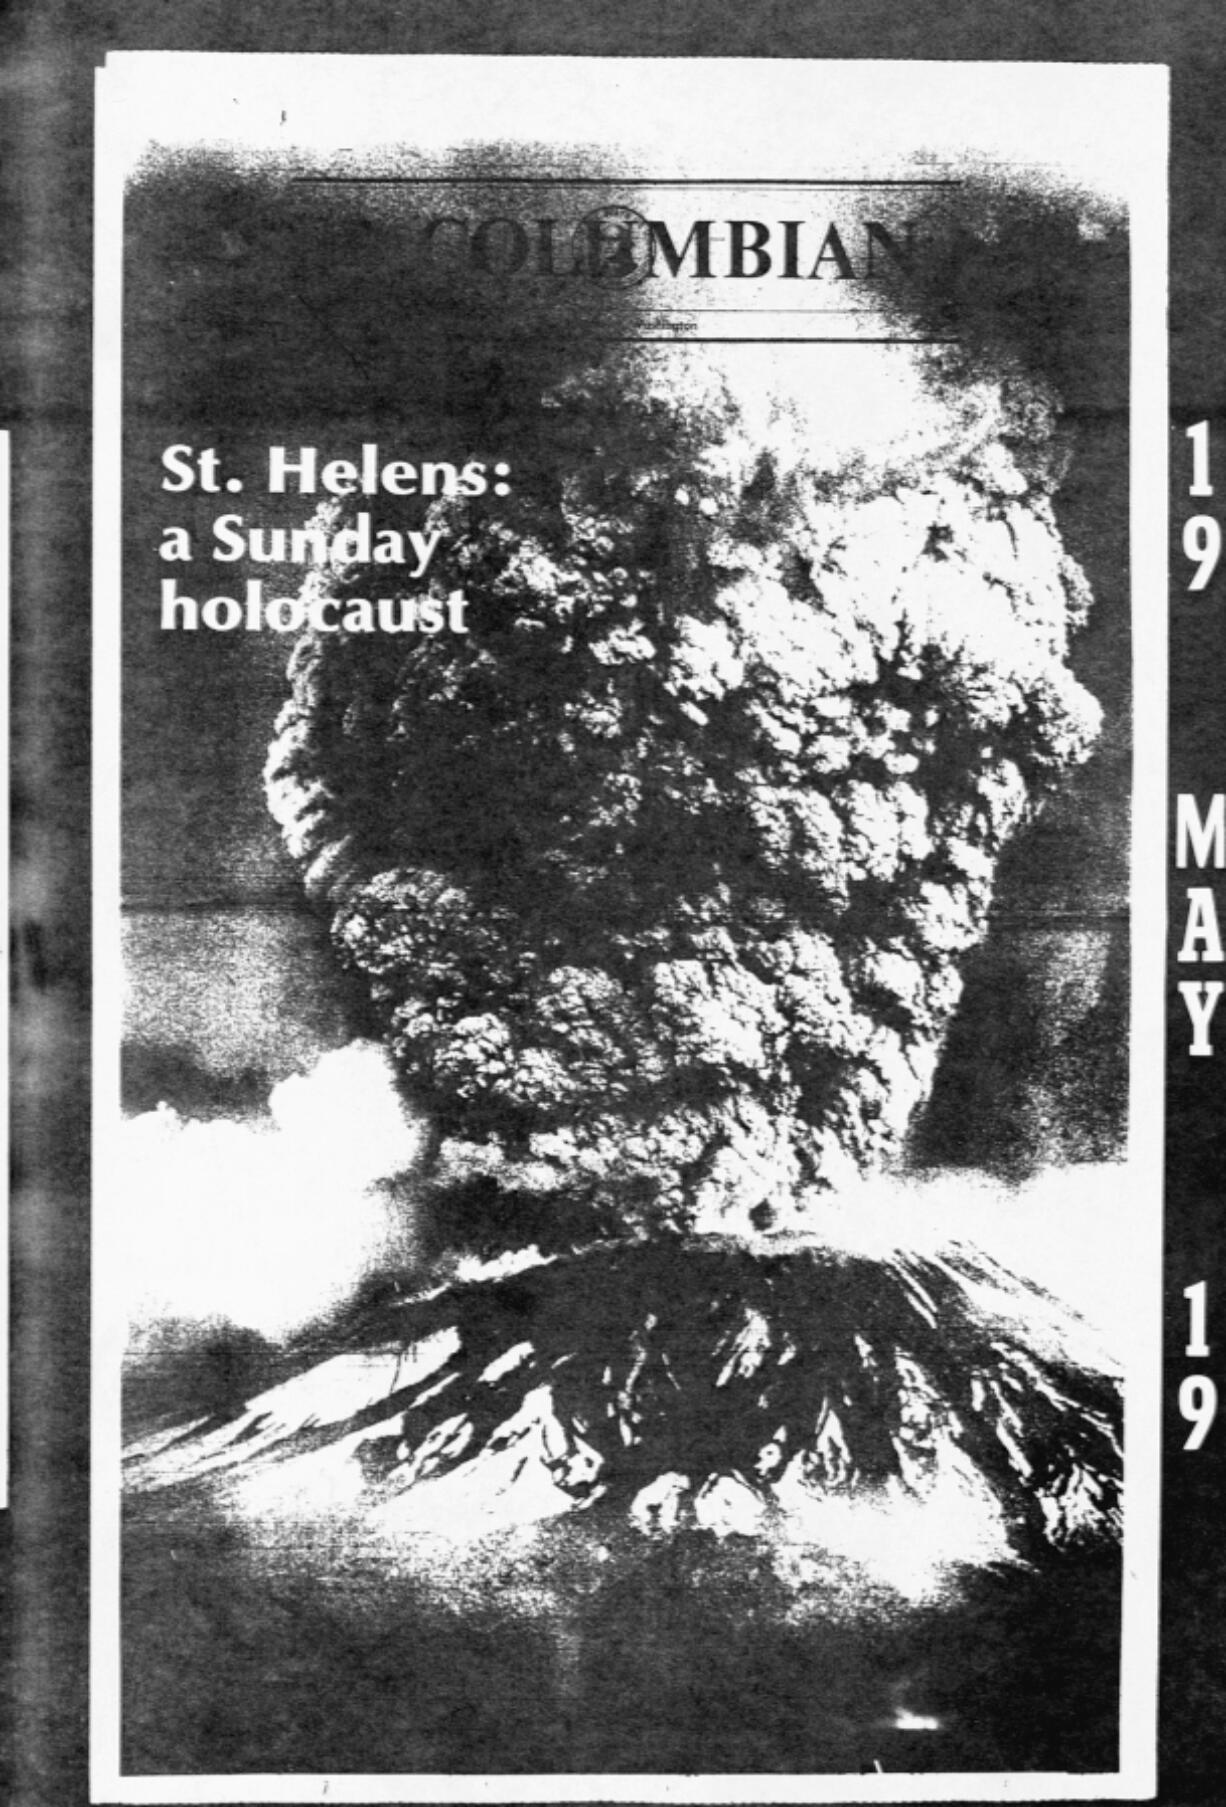 The Monday, May 19, 1980 Columbain carried news of the eruption.